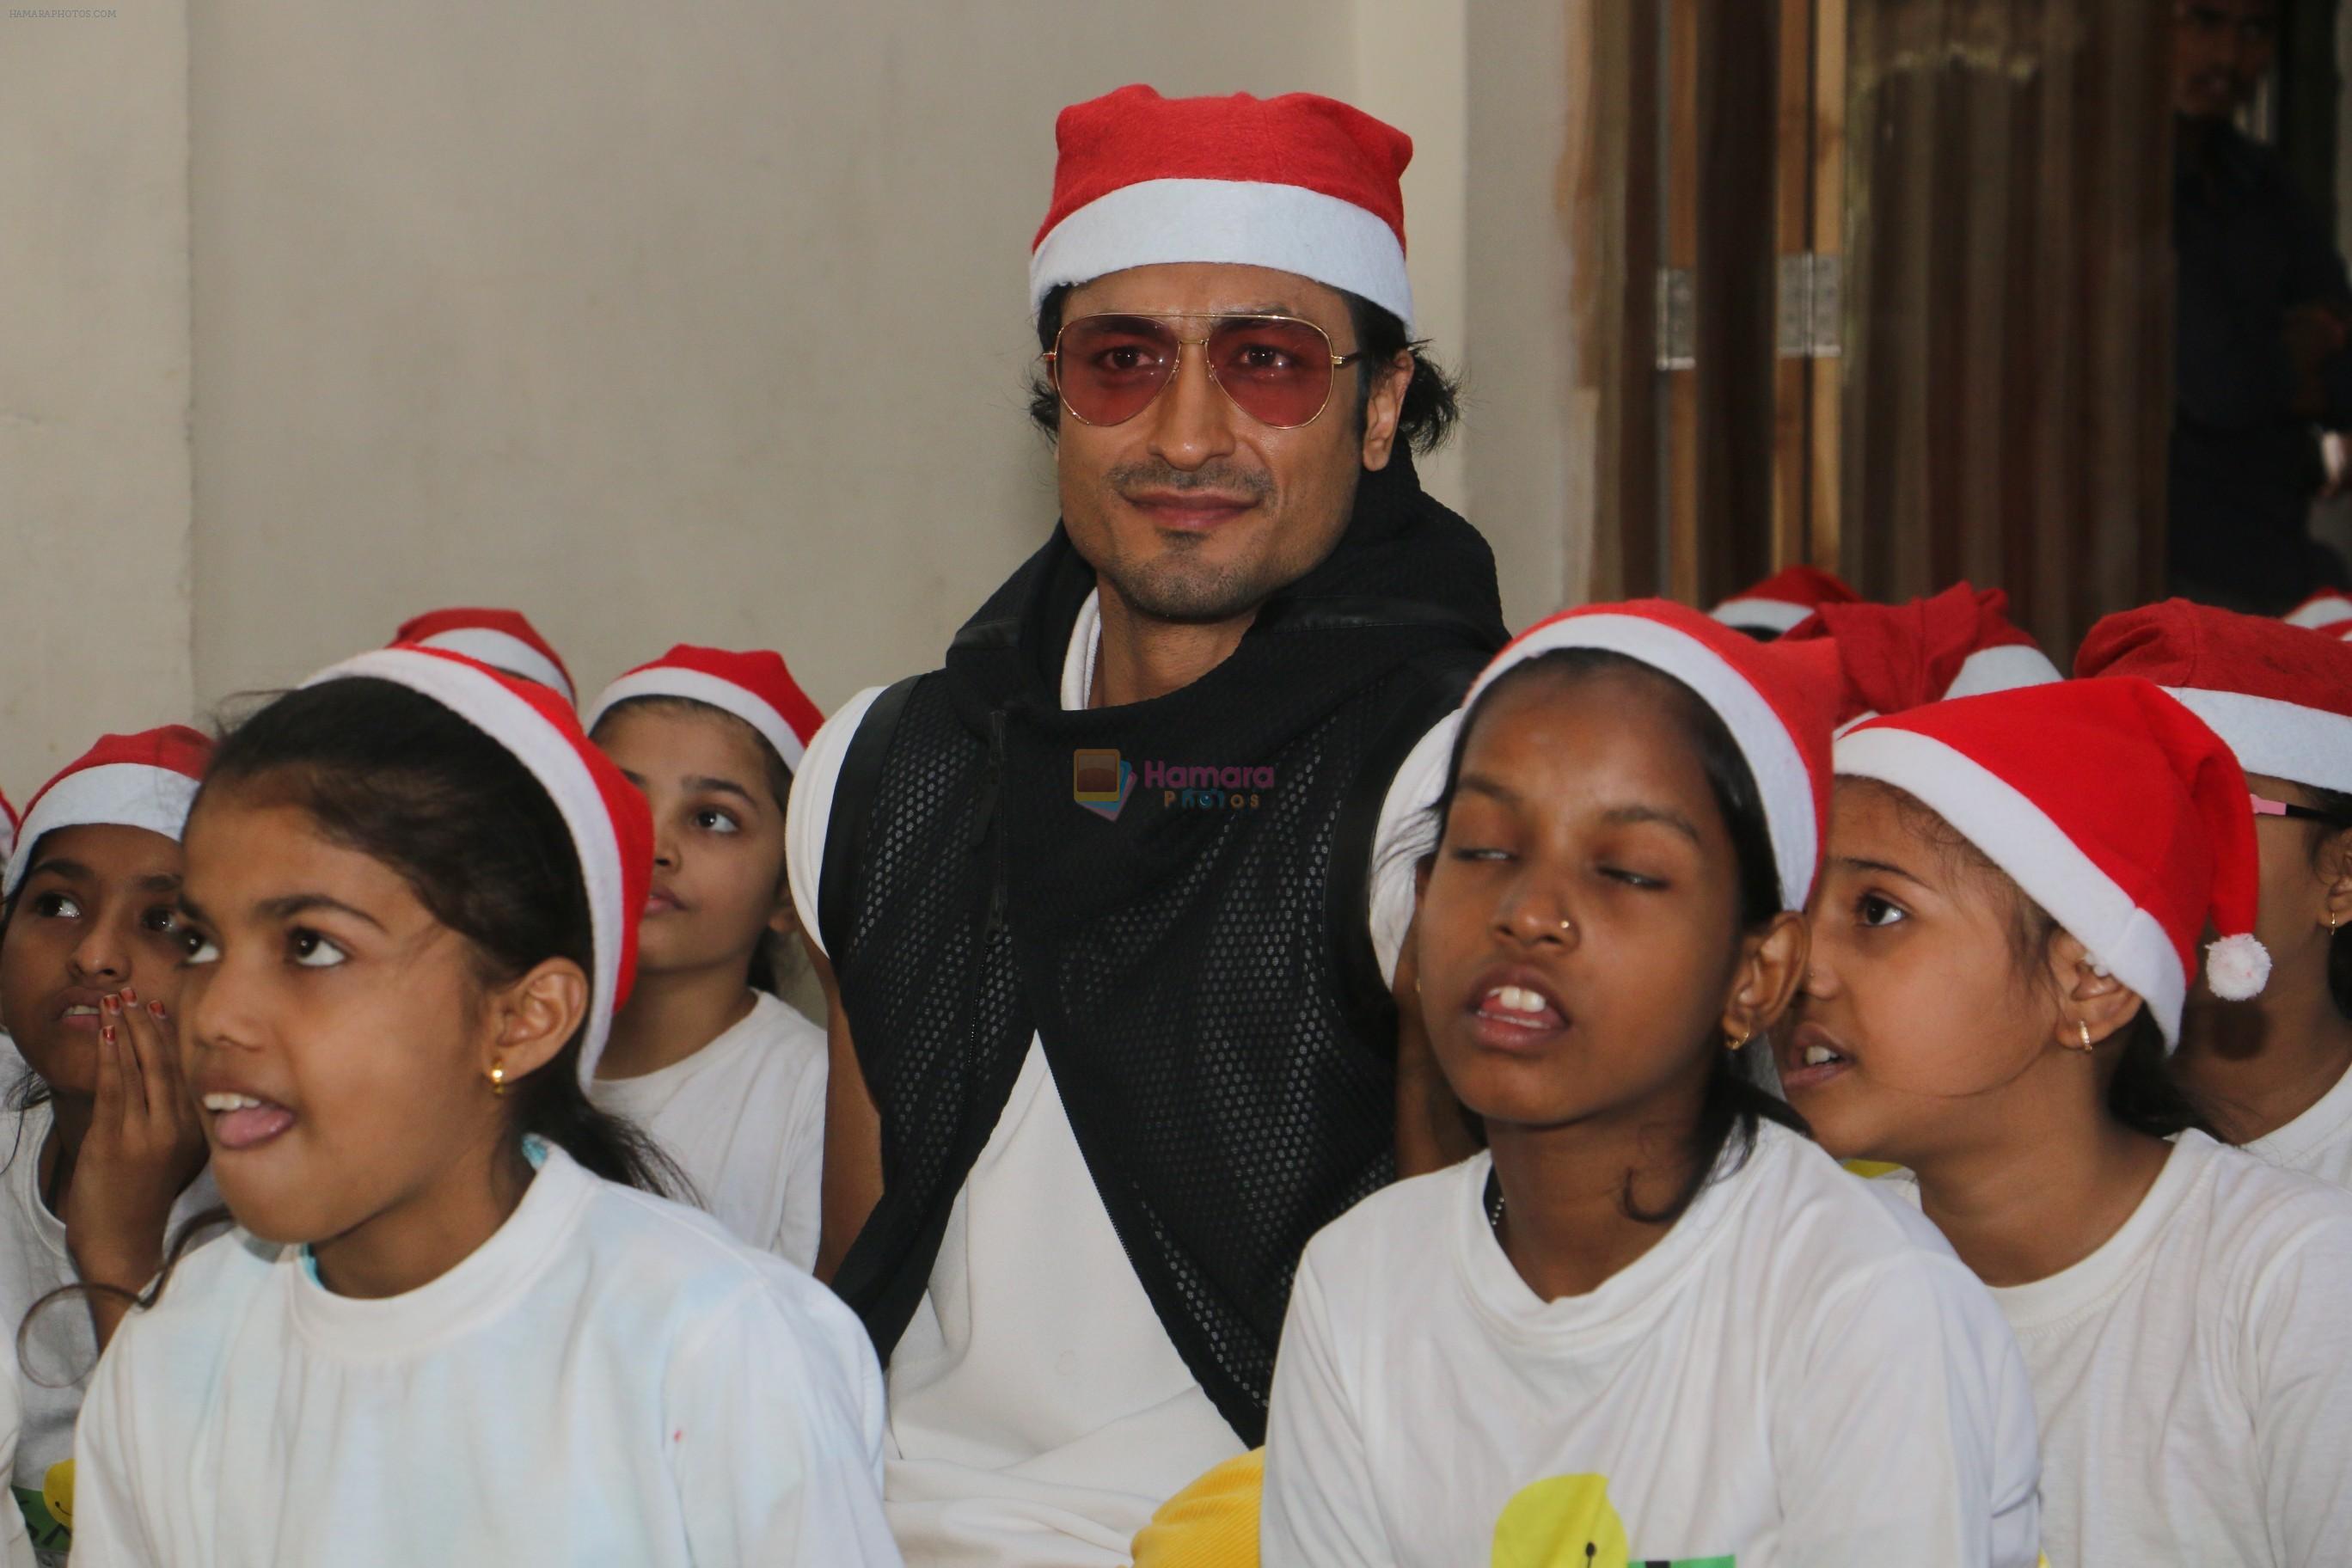 Vidyut Jamwal celebrates christmas with the kids of Smile foundation in andheri on 25th Dec 2018